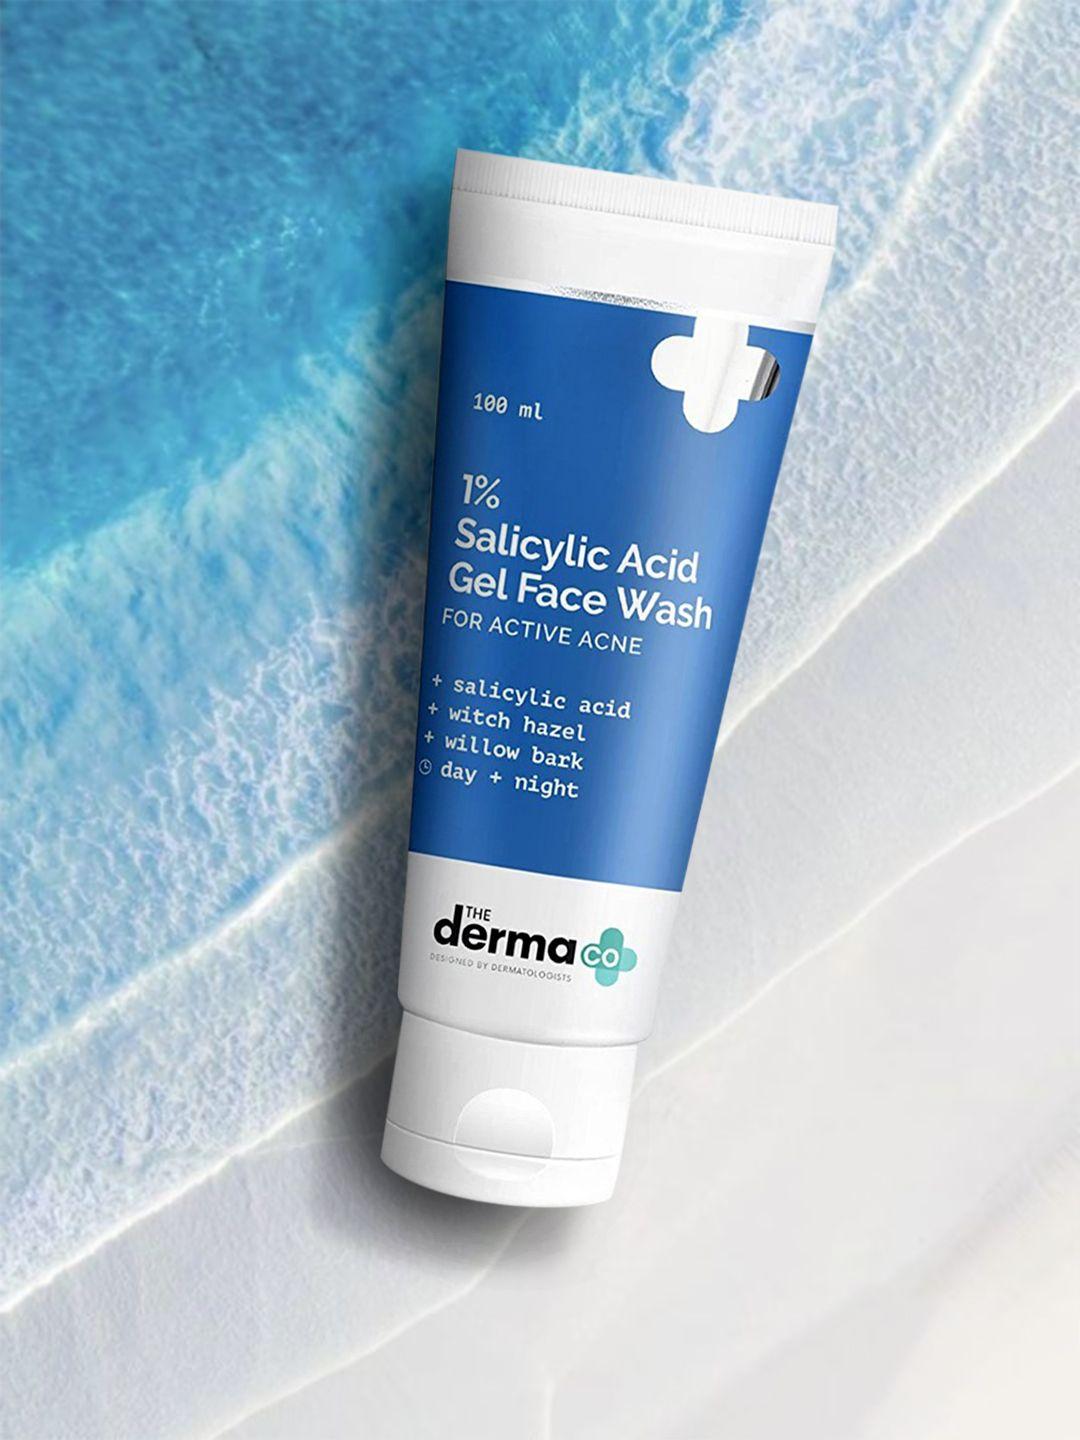 the derma co. 1% salicylic acid gel face wash with witch hazel for active acne